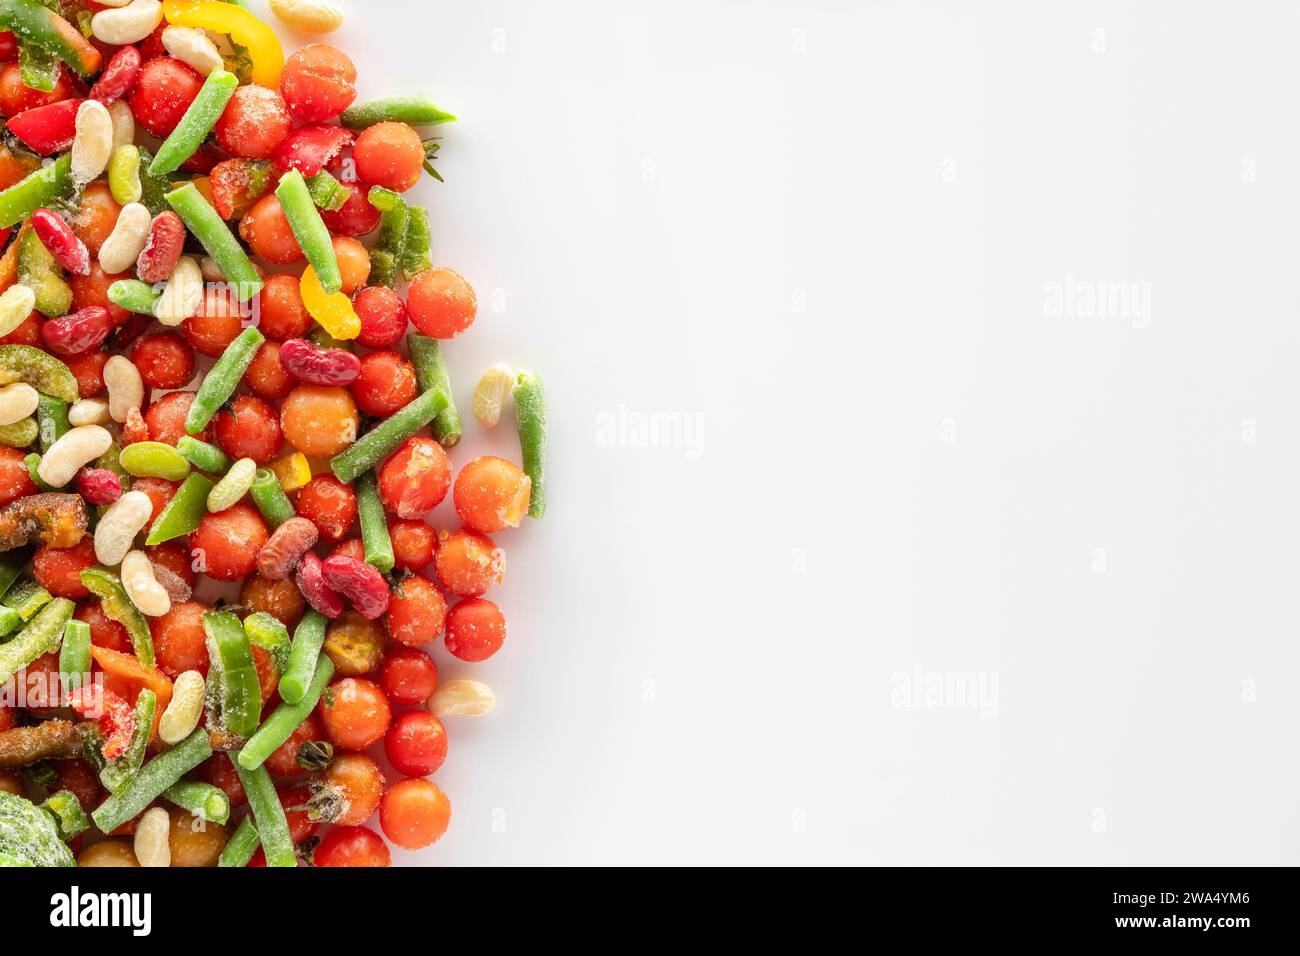 Frozen vegetables on a white background with copy space. Frozen assorted vegetables covered with snow and ice ready to cook. Stock Photo